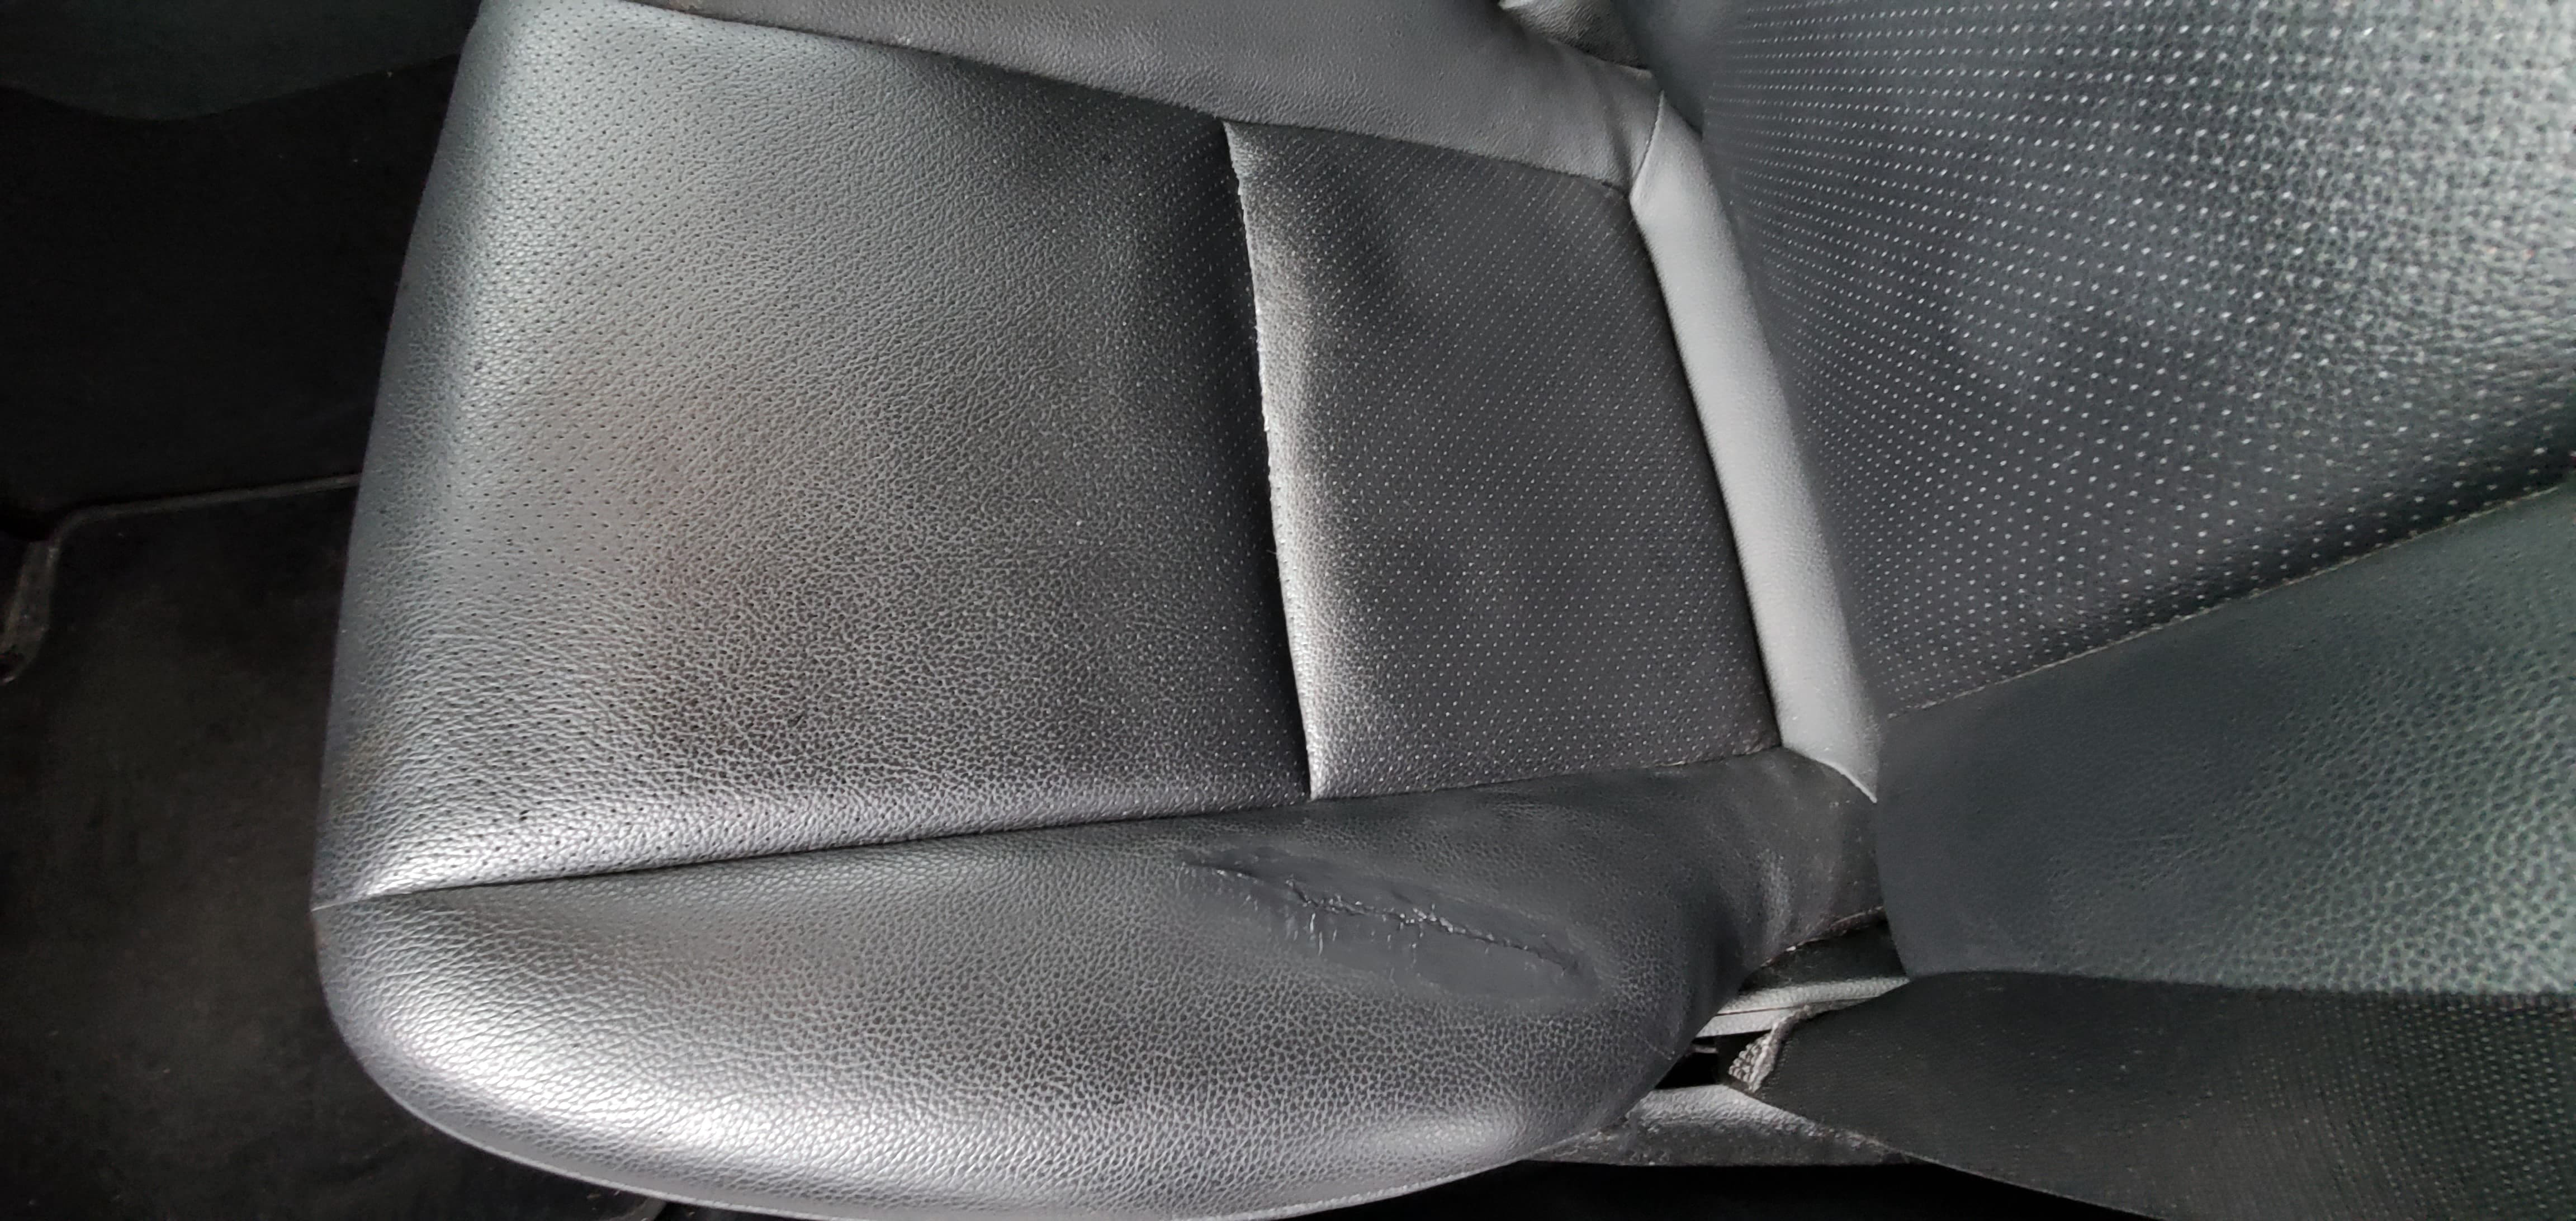 How to Prevent and Repair Damage to Leather Seats